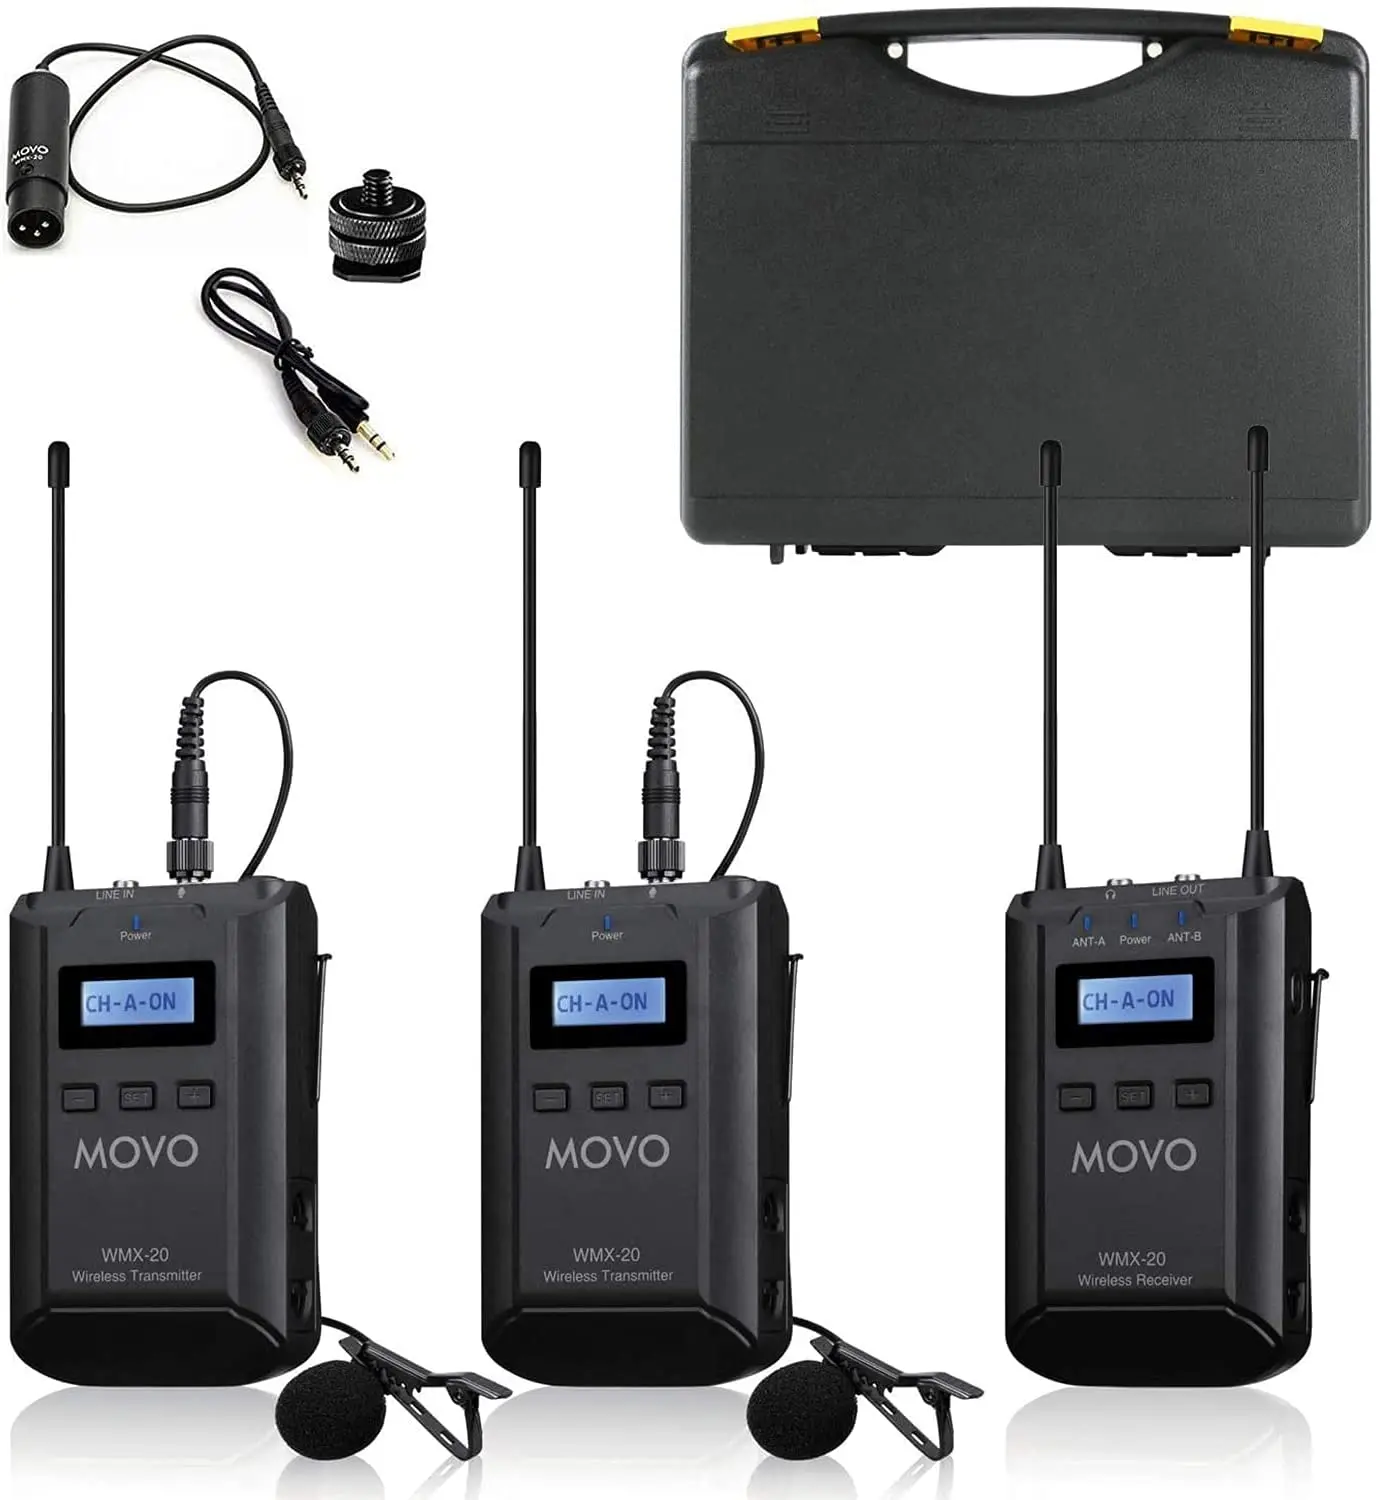 

Movo WMX-20-DUO 48-Channel UHF Wireless Lavalier Microphone System with 1 Receiver, 2 Transmitters, and 2 Lapel Microphones